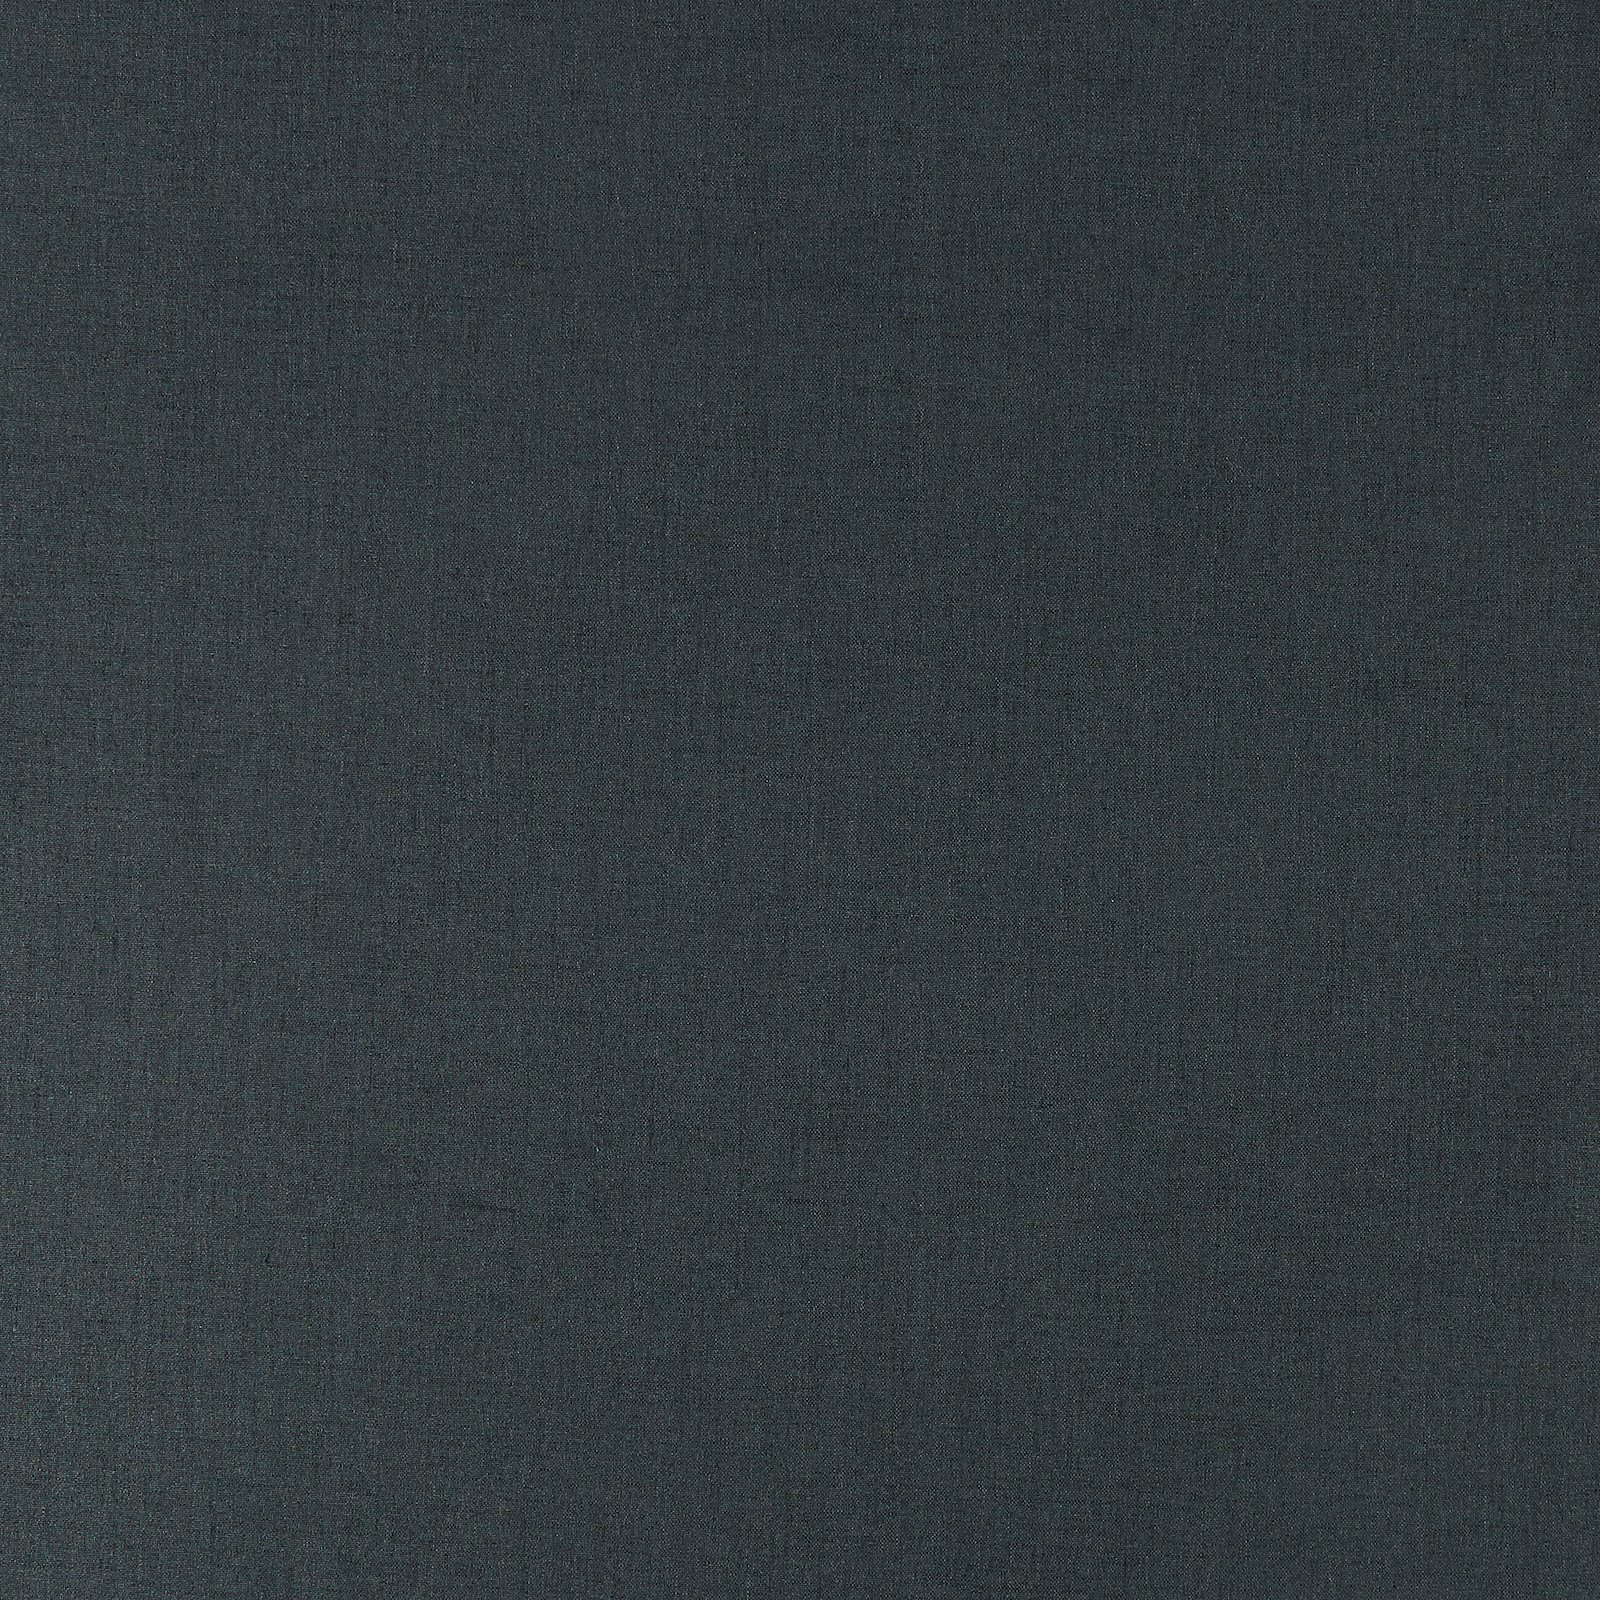 Upholstery fabric w/backing dark grey 823954_pack_sp